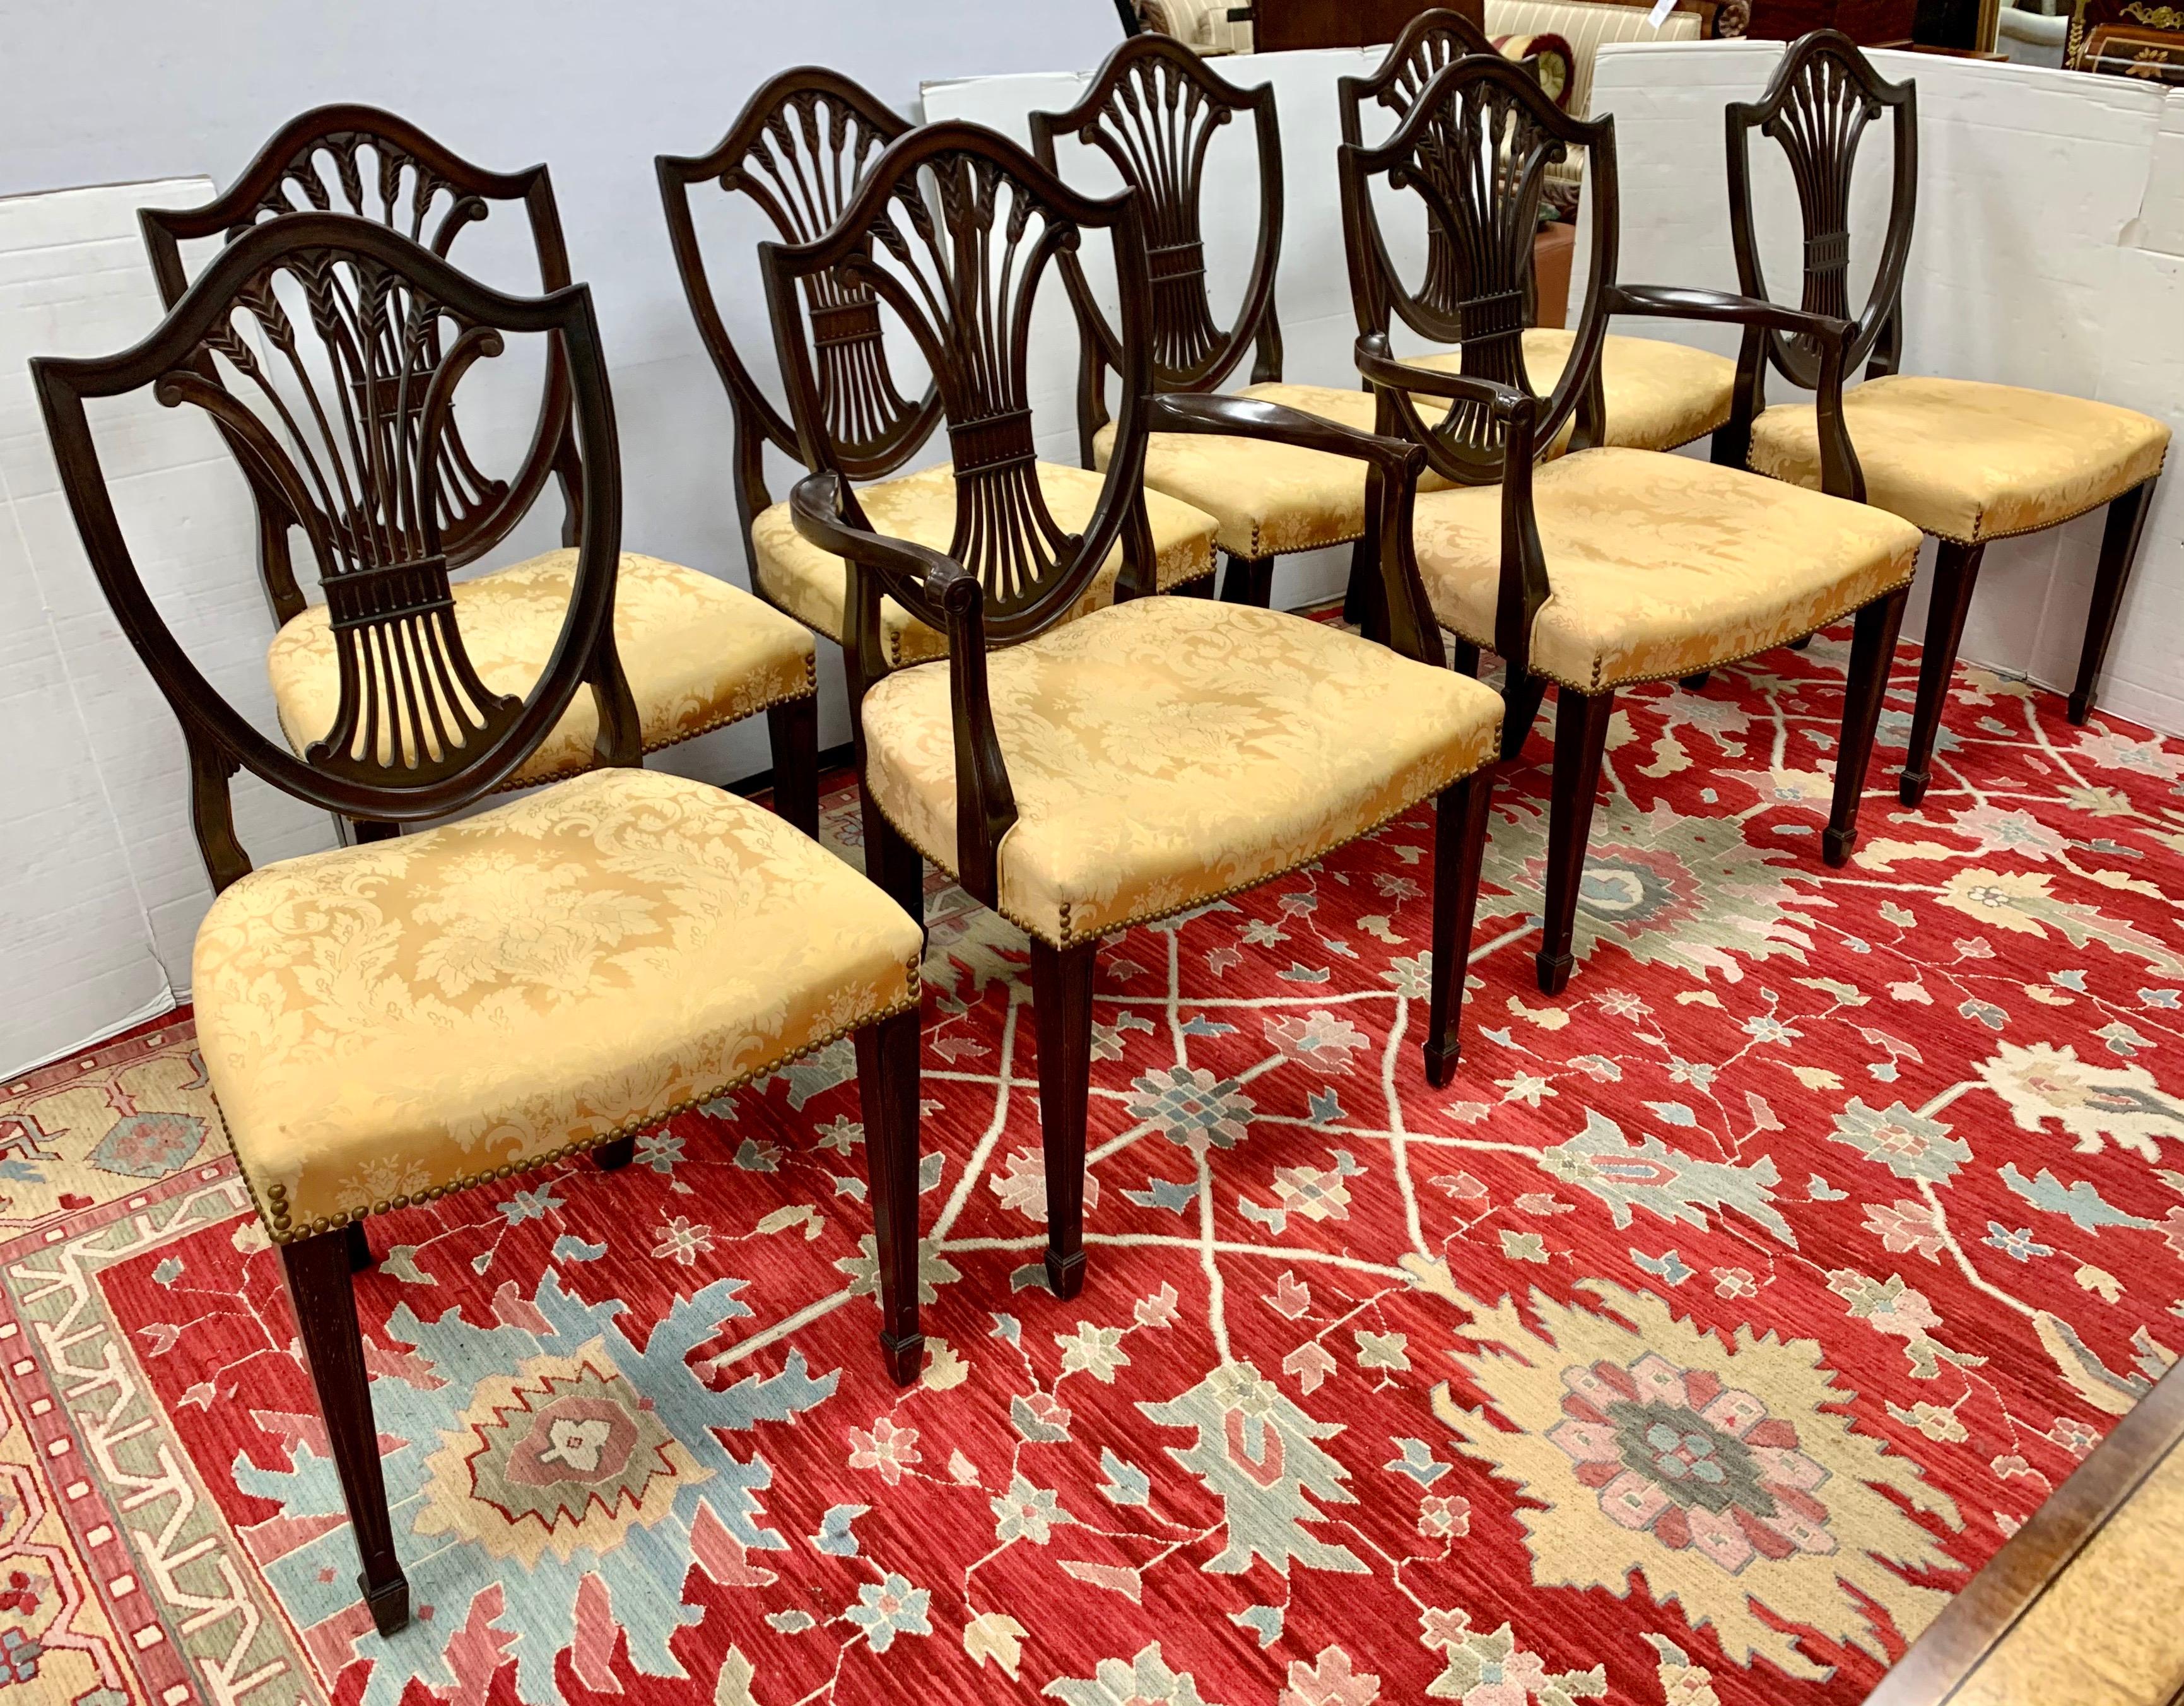 Fine set of antique carved mahogany Hepplewhite dining chairs circa, 1900 consisting of two arm chairs and six side chairs all with striking shield shaped backs and decorative pierced back splats with a wheat sheaf design. They are upholstered in a